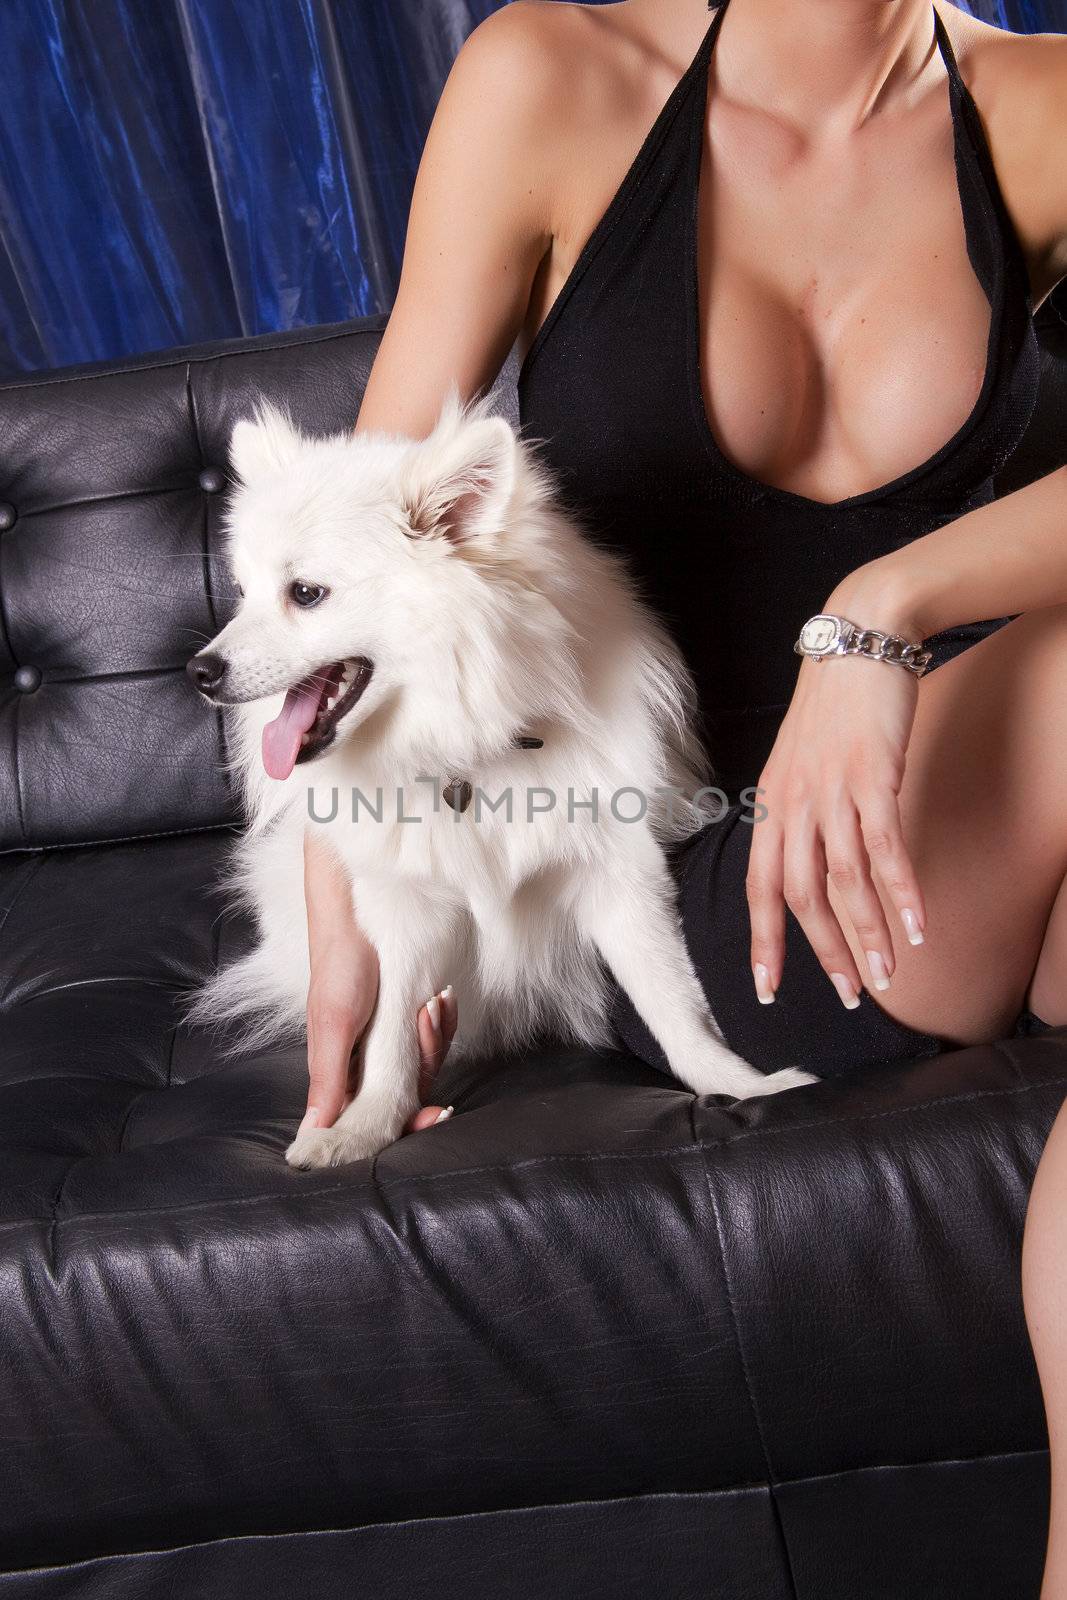 White dog and woman in black dress